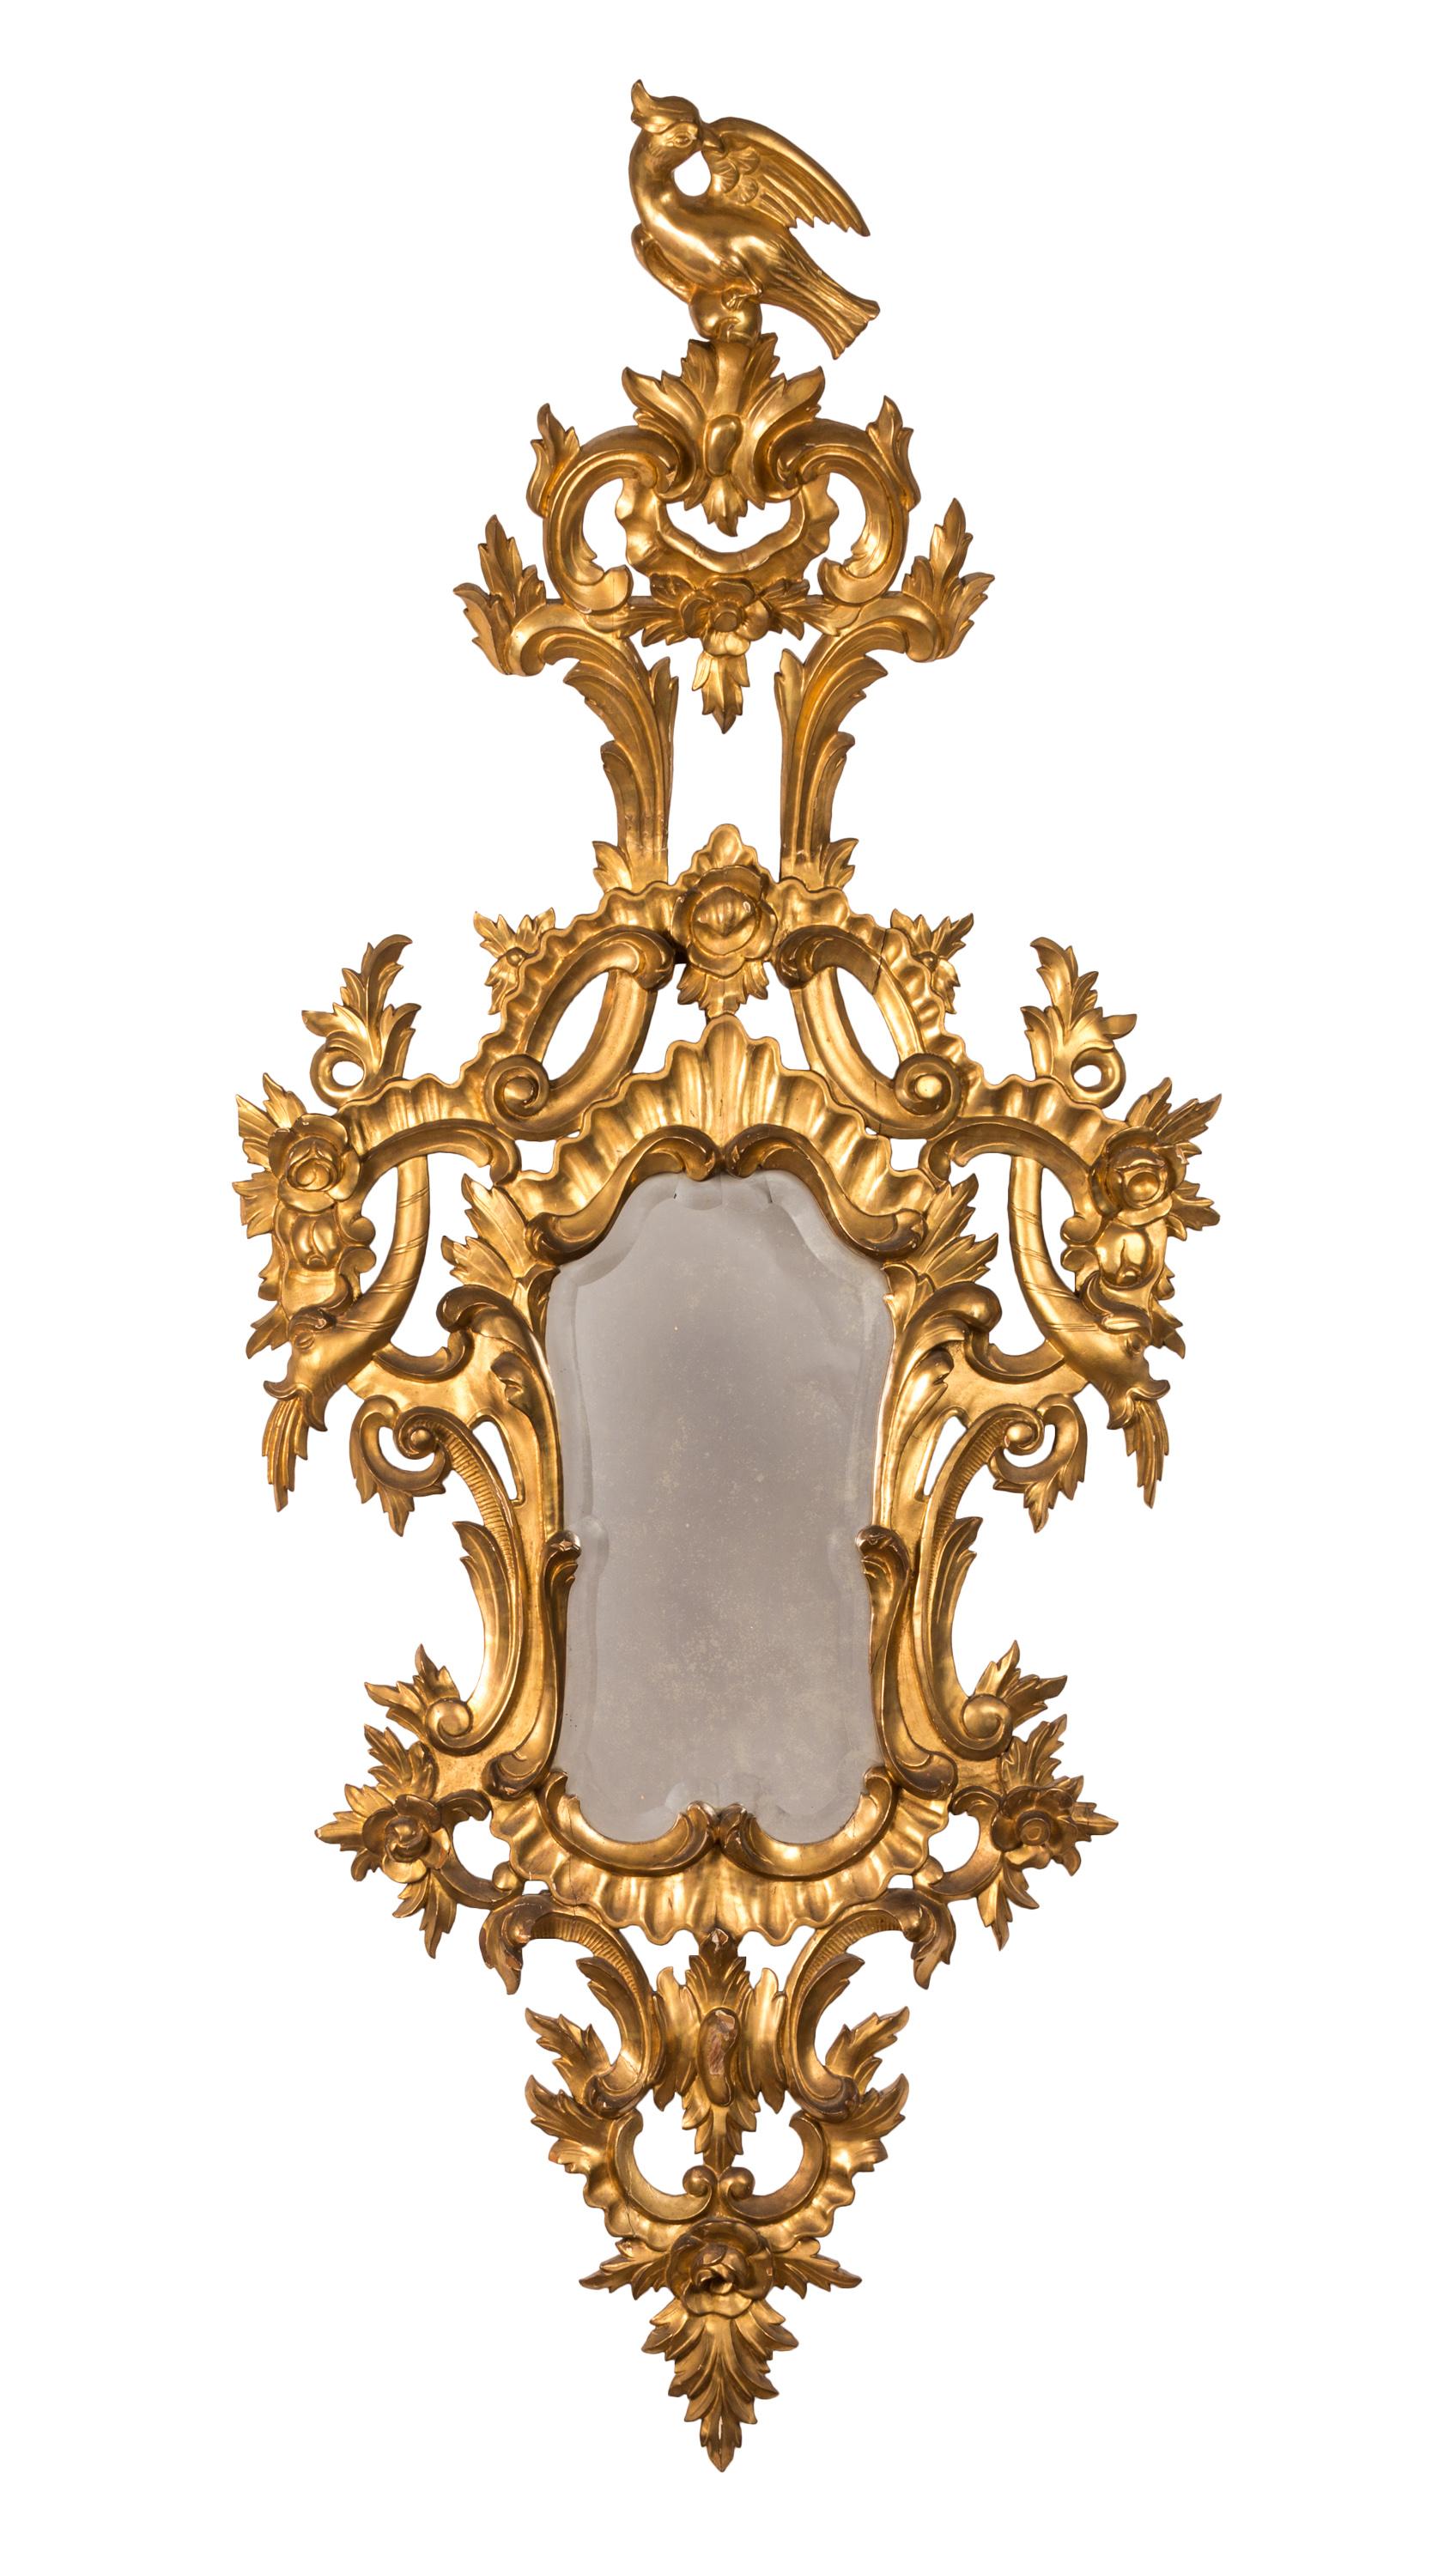 Trio of 18th century French Rococo mirrors, with finely carved and gilded wood frames. 
Design elements including plants and flowers, spouting fish, and the typical Rococo 